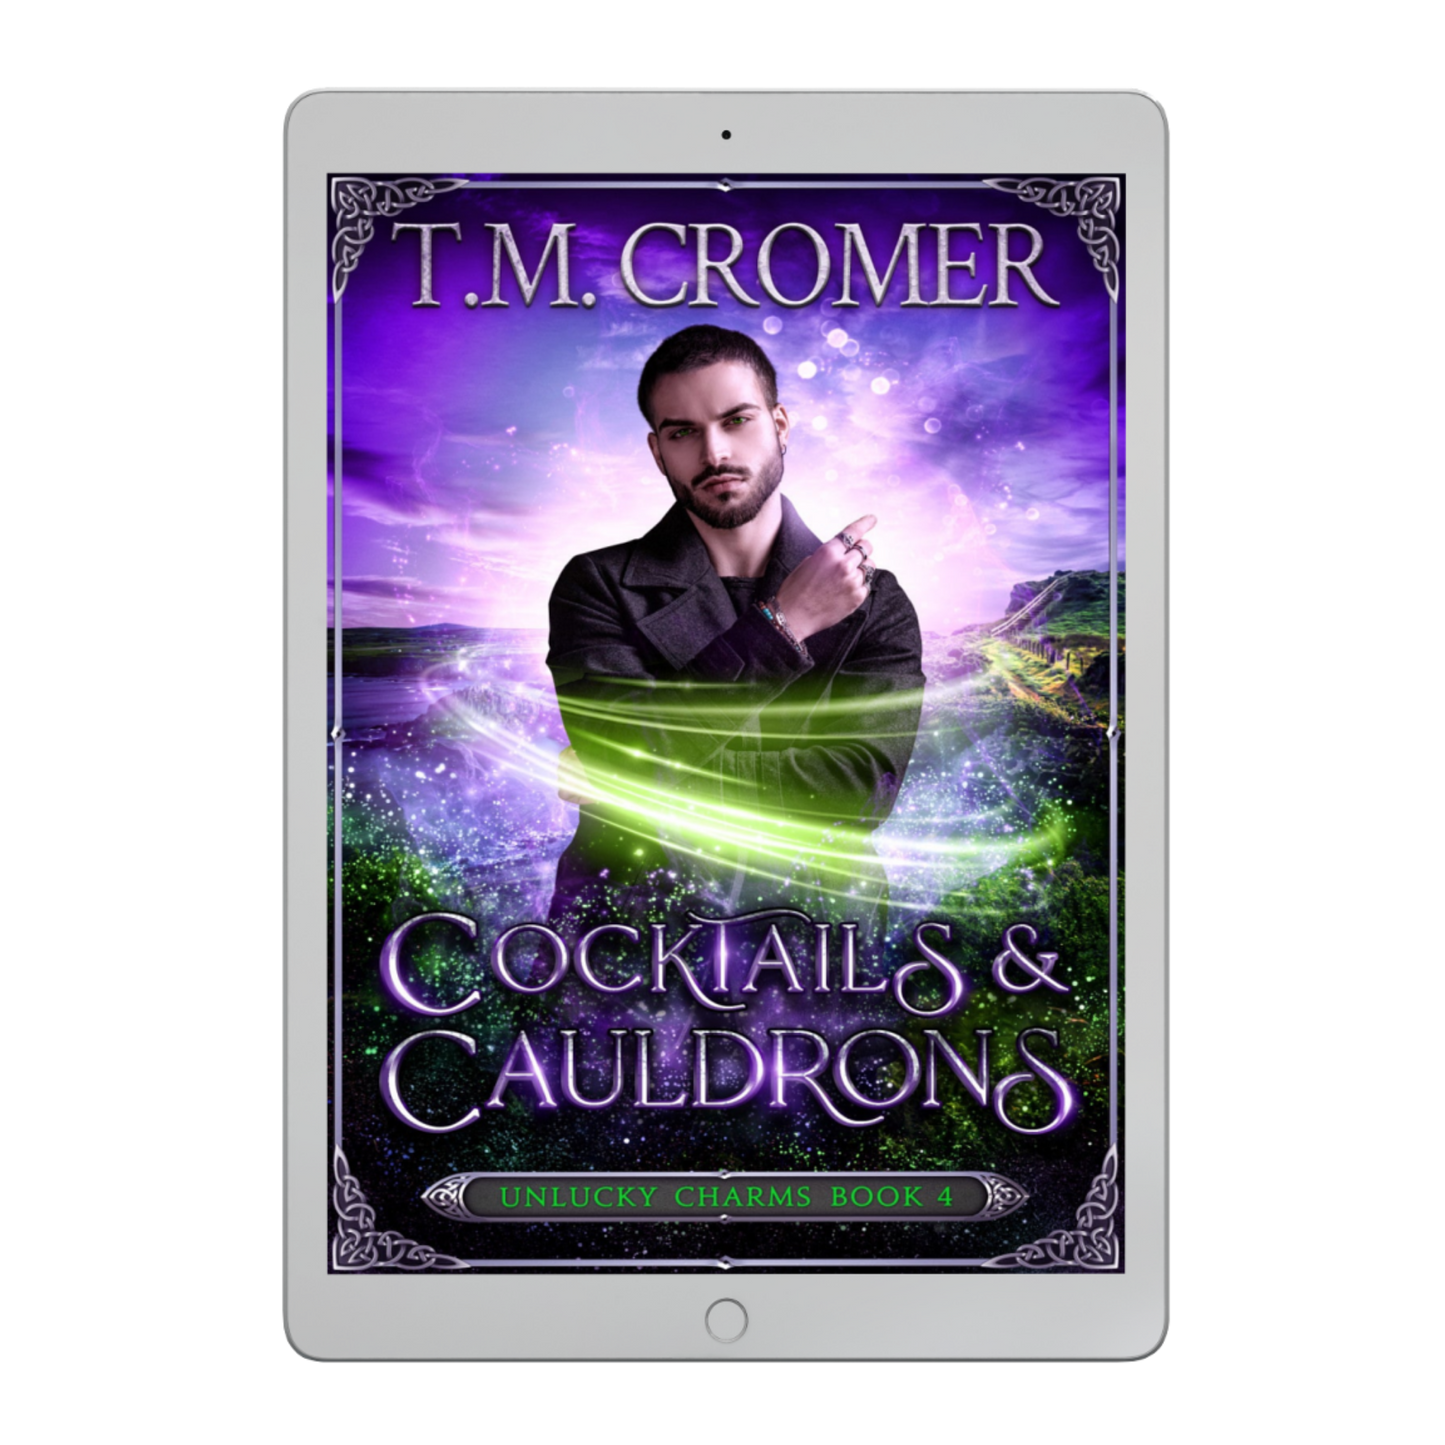 Cocktails and Cauldrons Unlucky Charms #4 Ebook Paranormal Romance Urban Fantasy Magical Realism Irish Adventure Witches and Warlocks